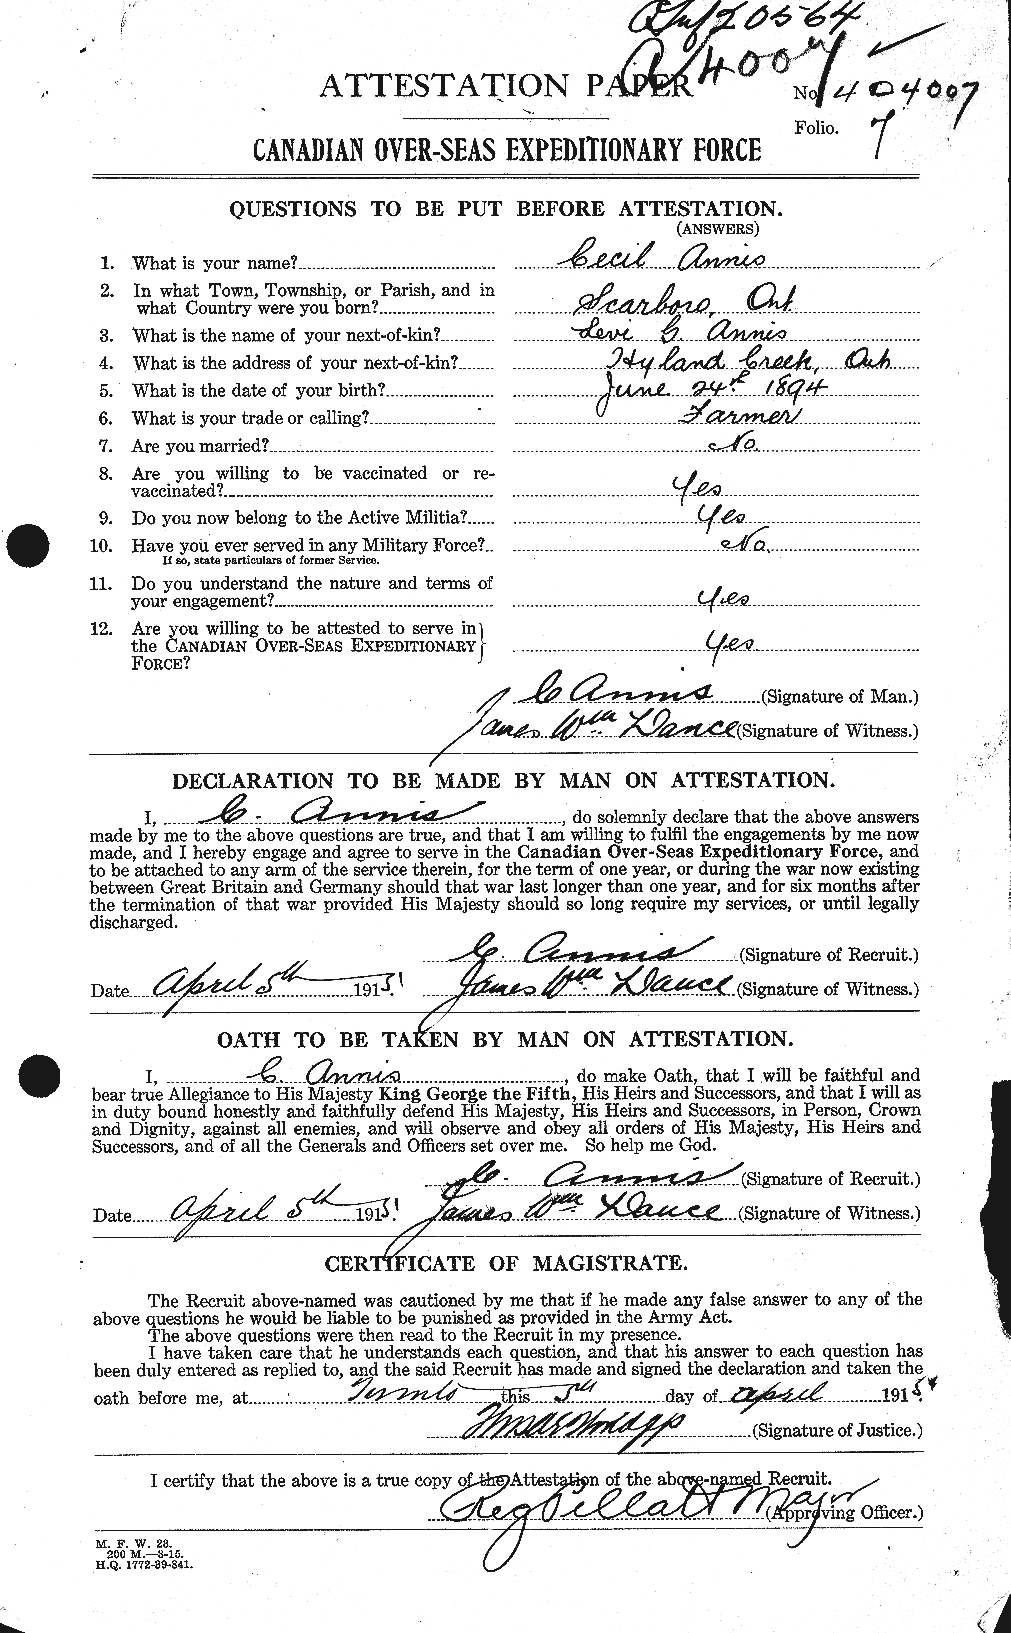 Personnel Records of the First World War - CEF 212414a